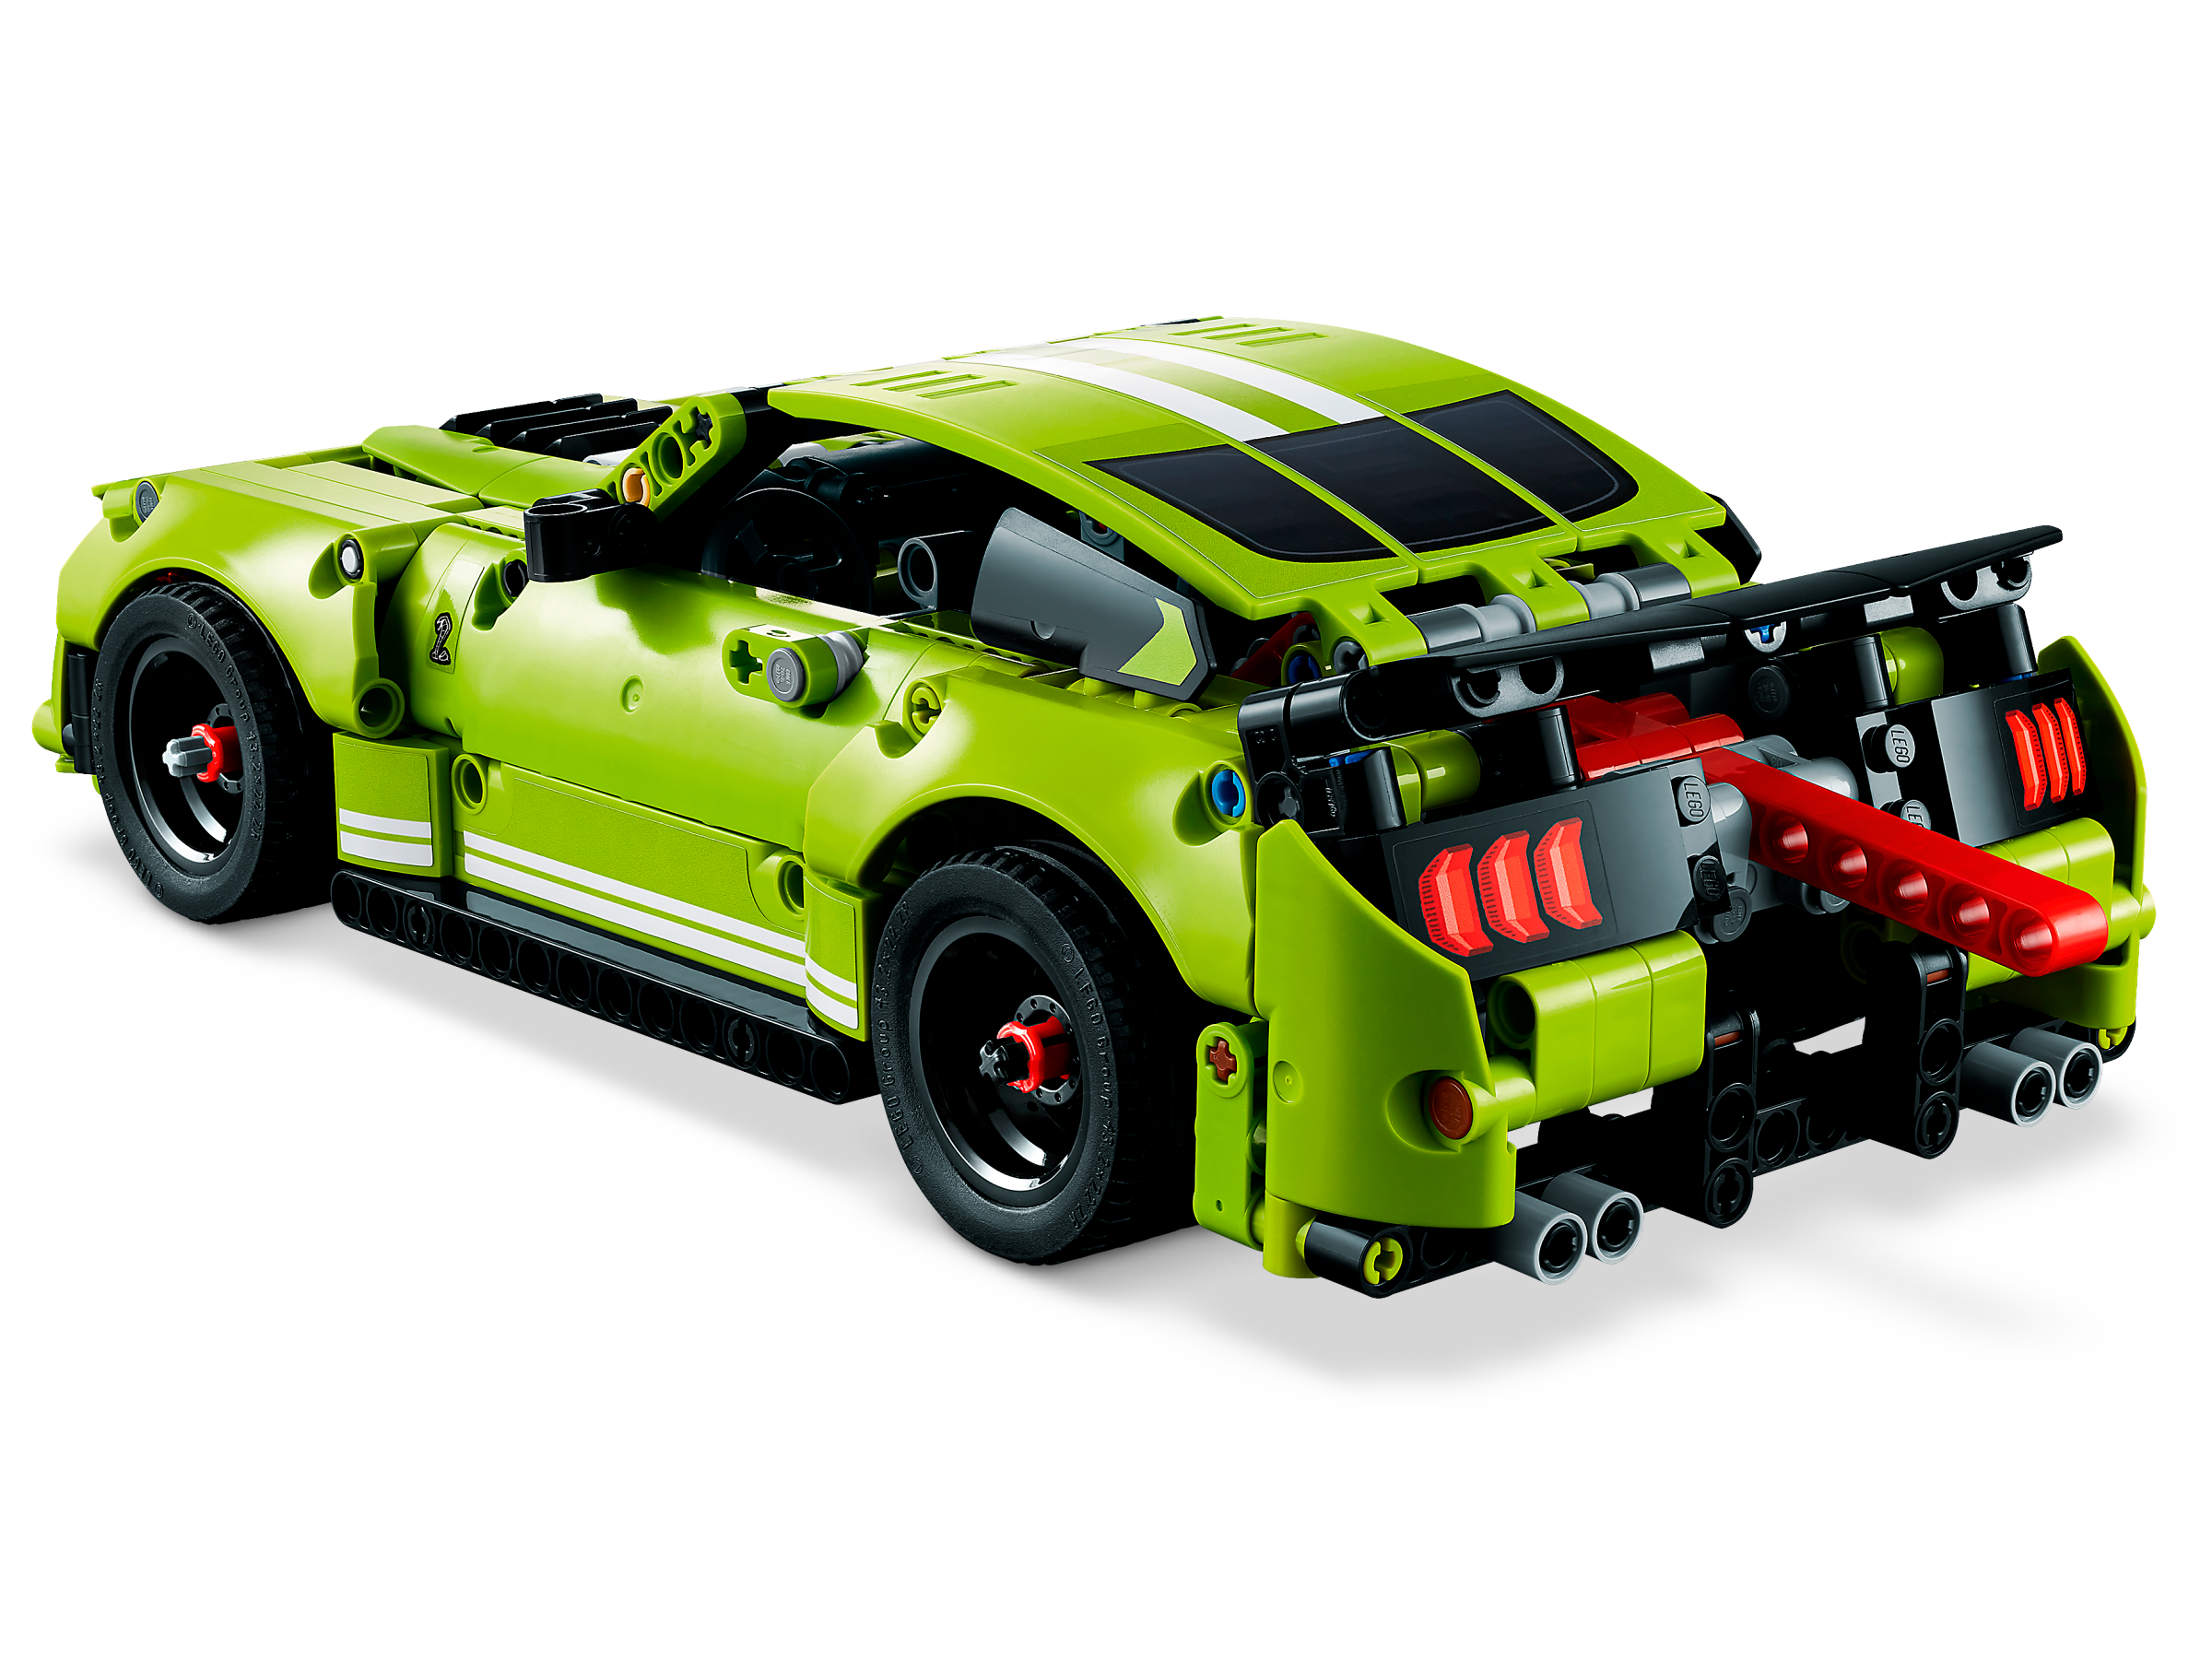 LEGO Technic 42138 Ford Mustang Shelby GT500 detailed building